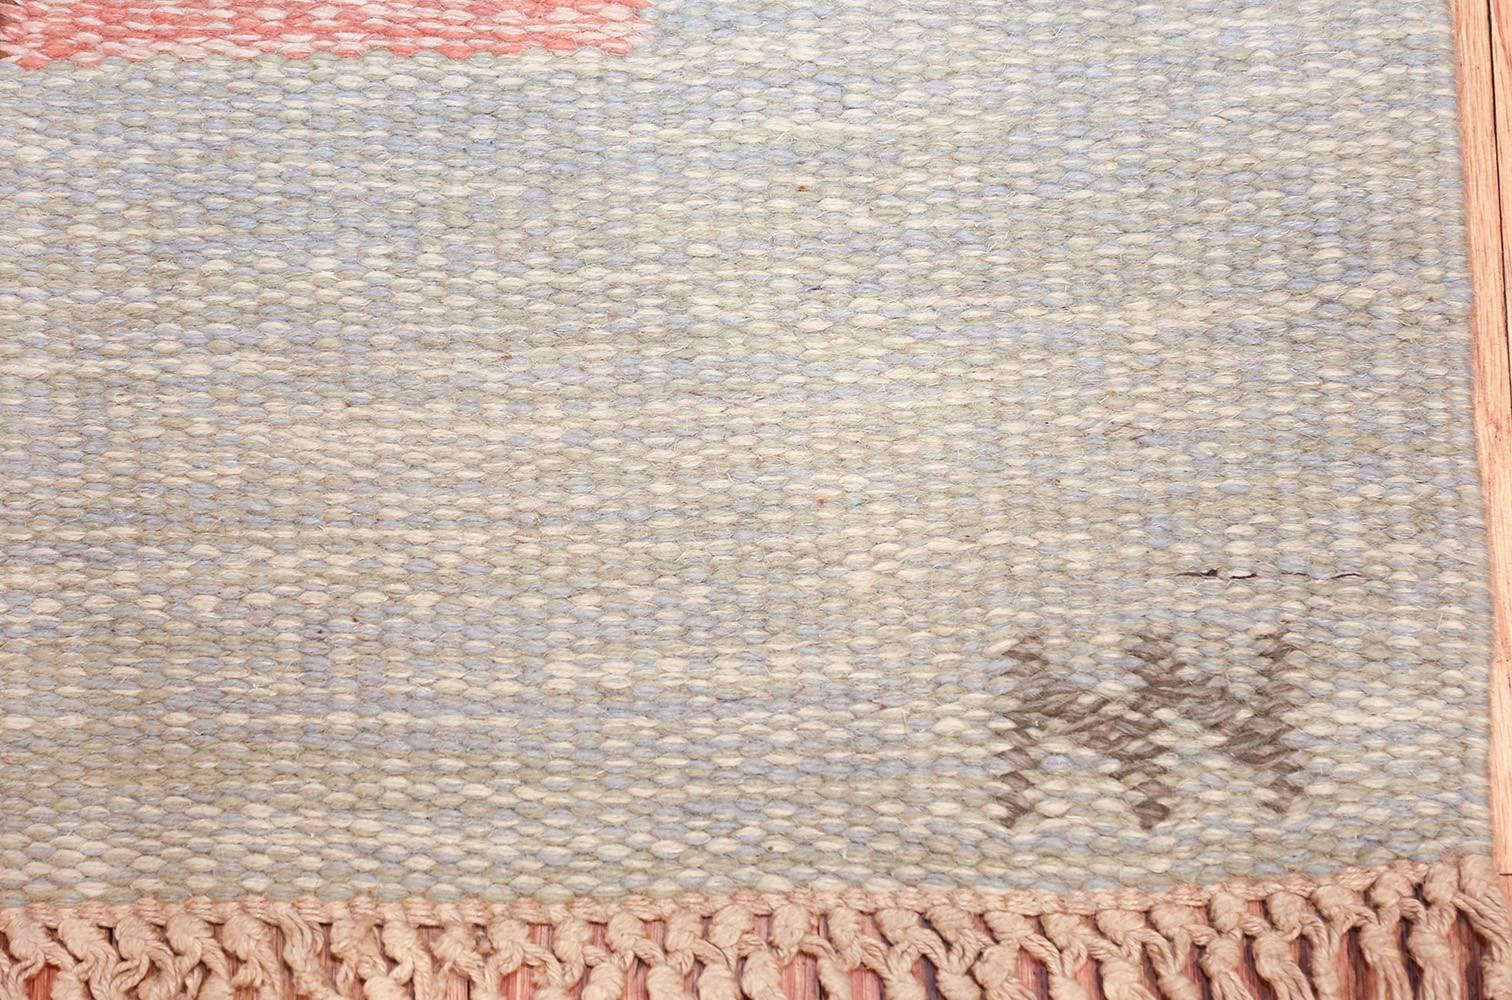 Hand-Woven Vintage Geometric Signed NN Swedish Scandinavian Rug. Size: 5 ft 5 in x 8 ft 